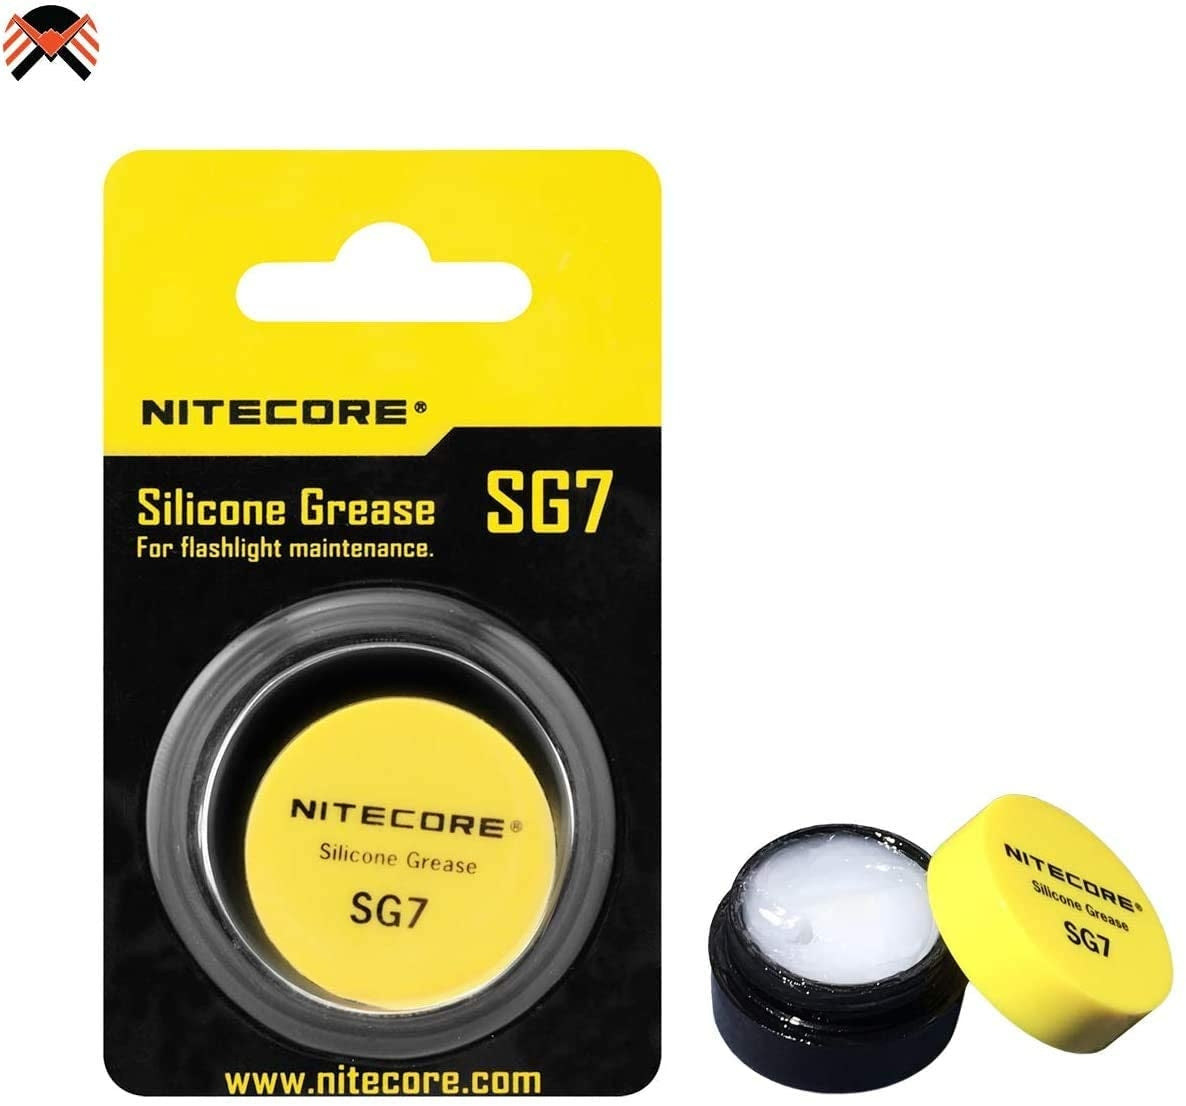 NITECORE SG7 Silicone Grease Suitable for rubber seals